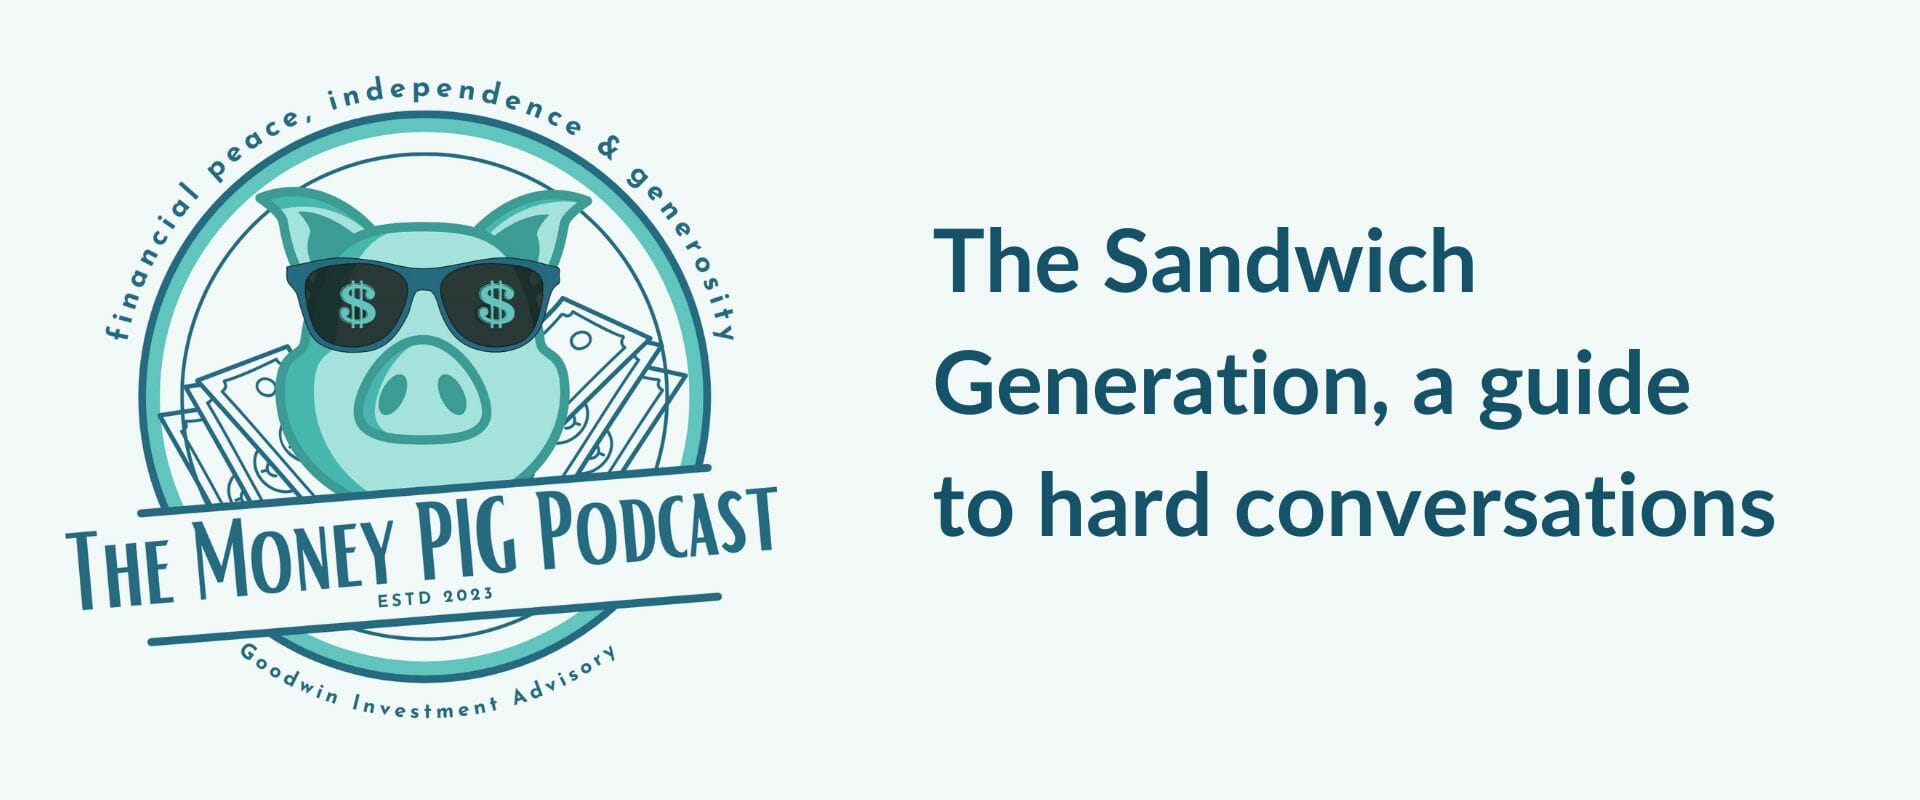 The Sandwich Generation, a guide to hard conversations